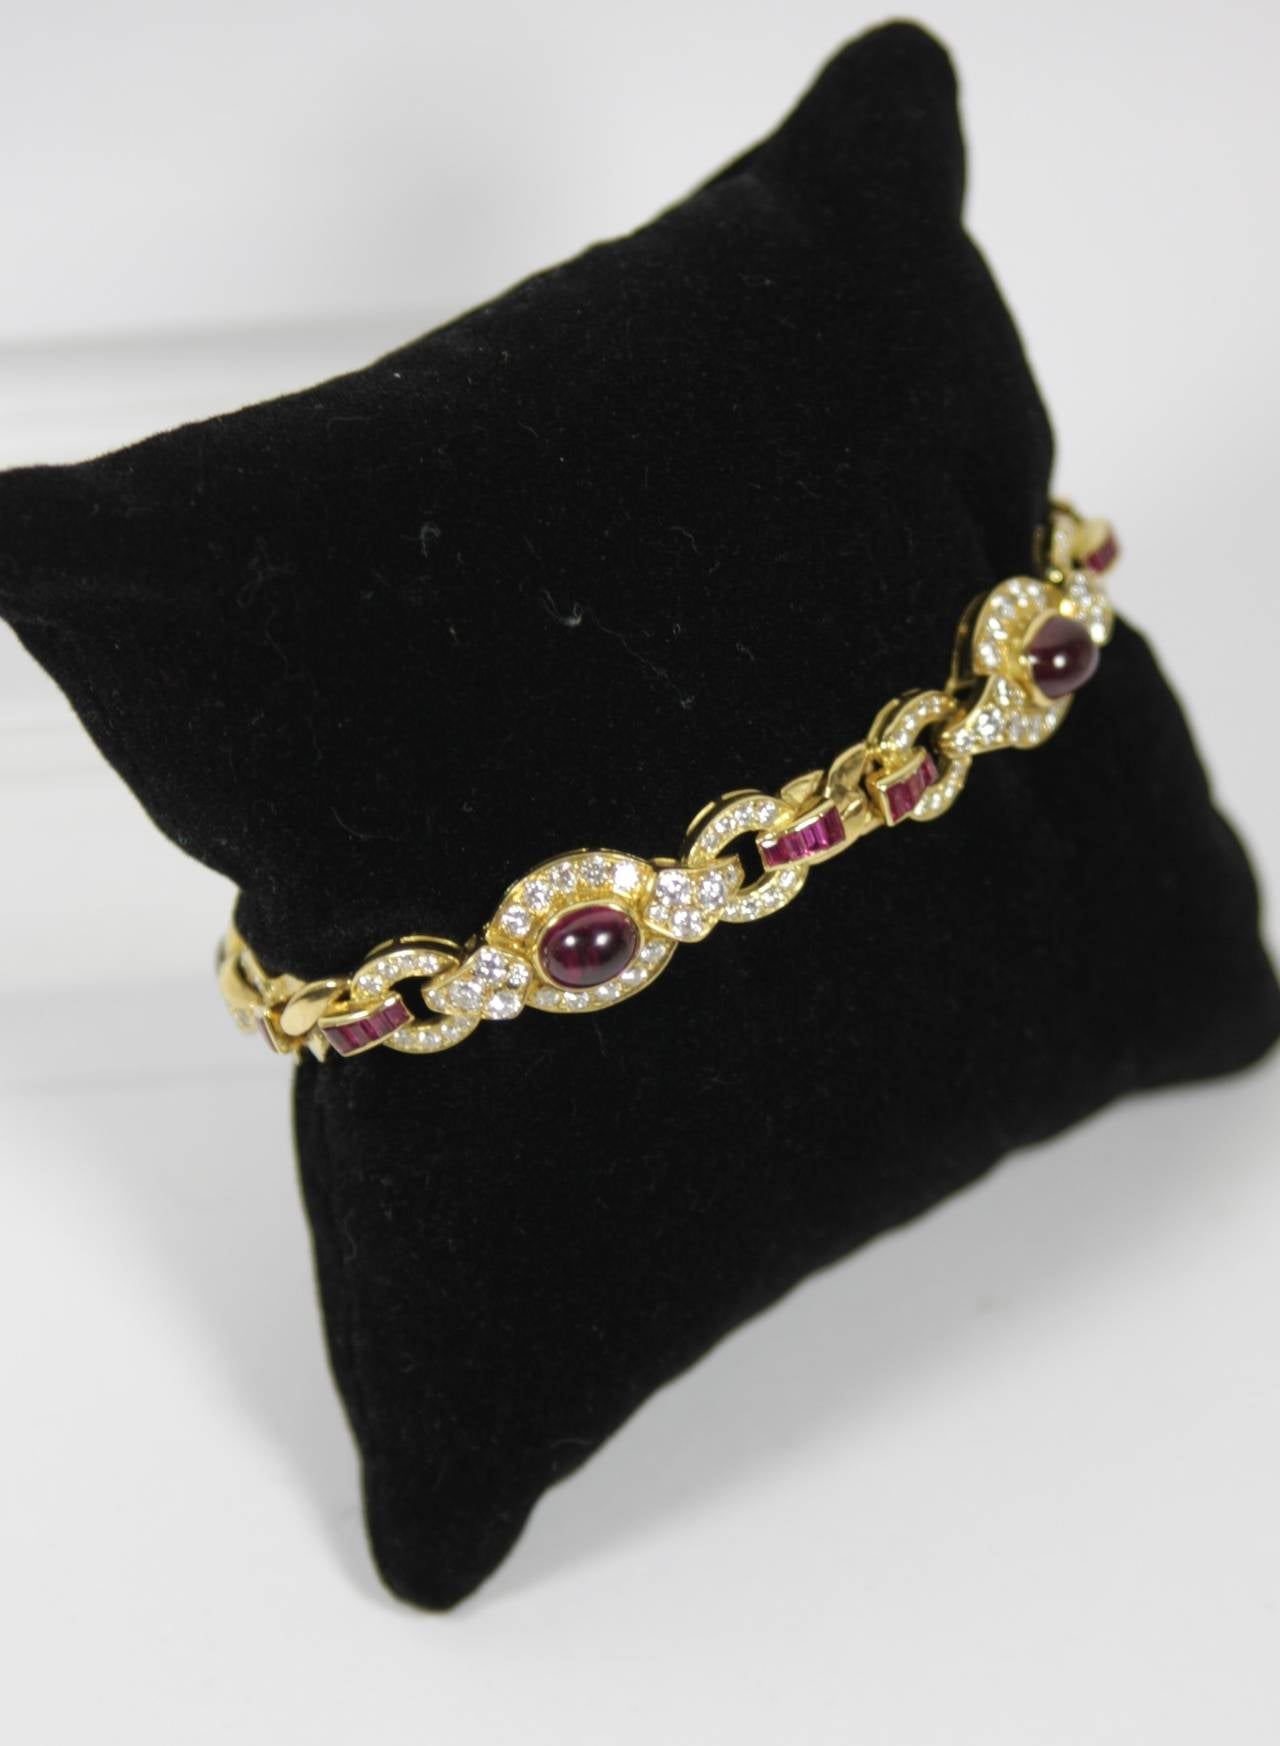 Cabochon and Calibre Cut Ruby Diamond Gold Bracelet In Excellent Condition For Sale In Los Angeles, CA